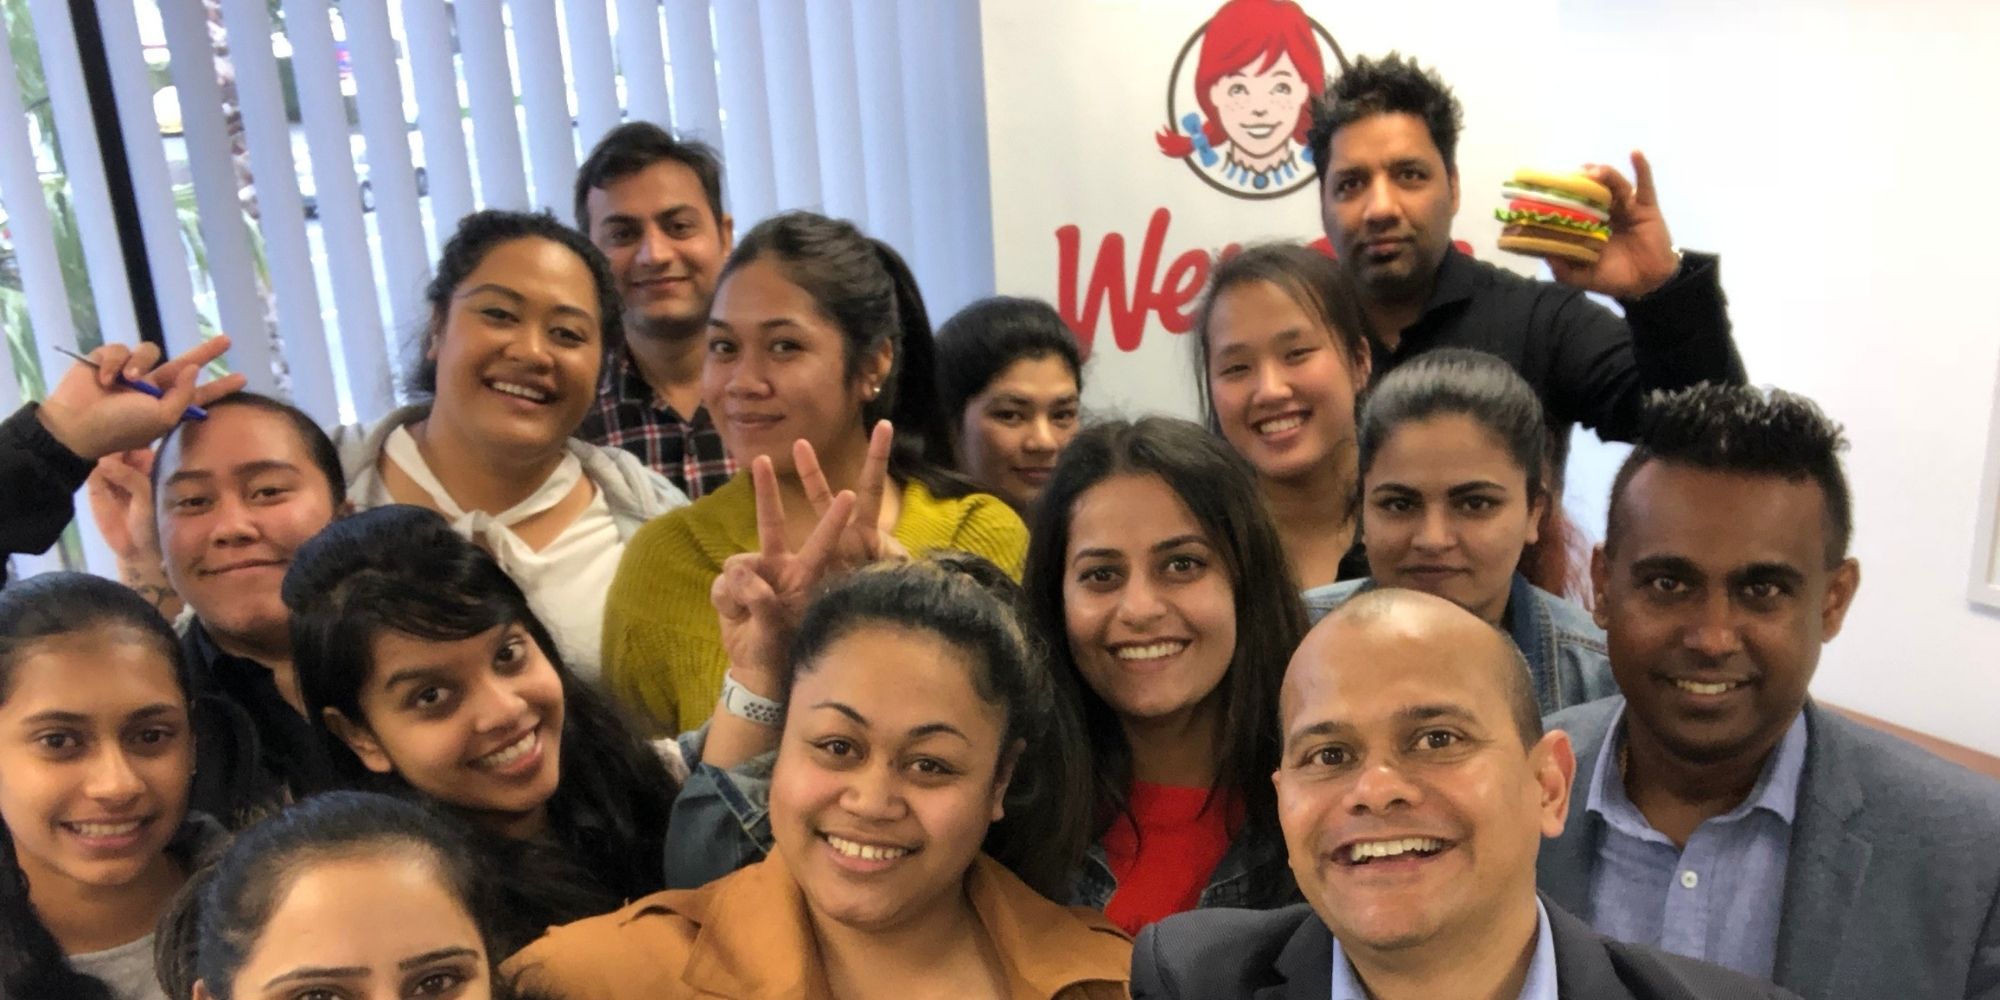 Wendy’s New Zealand Head Office Team uses Food Safe’s Food Safety Certificate Training